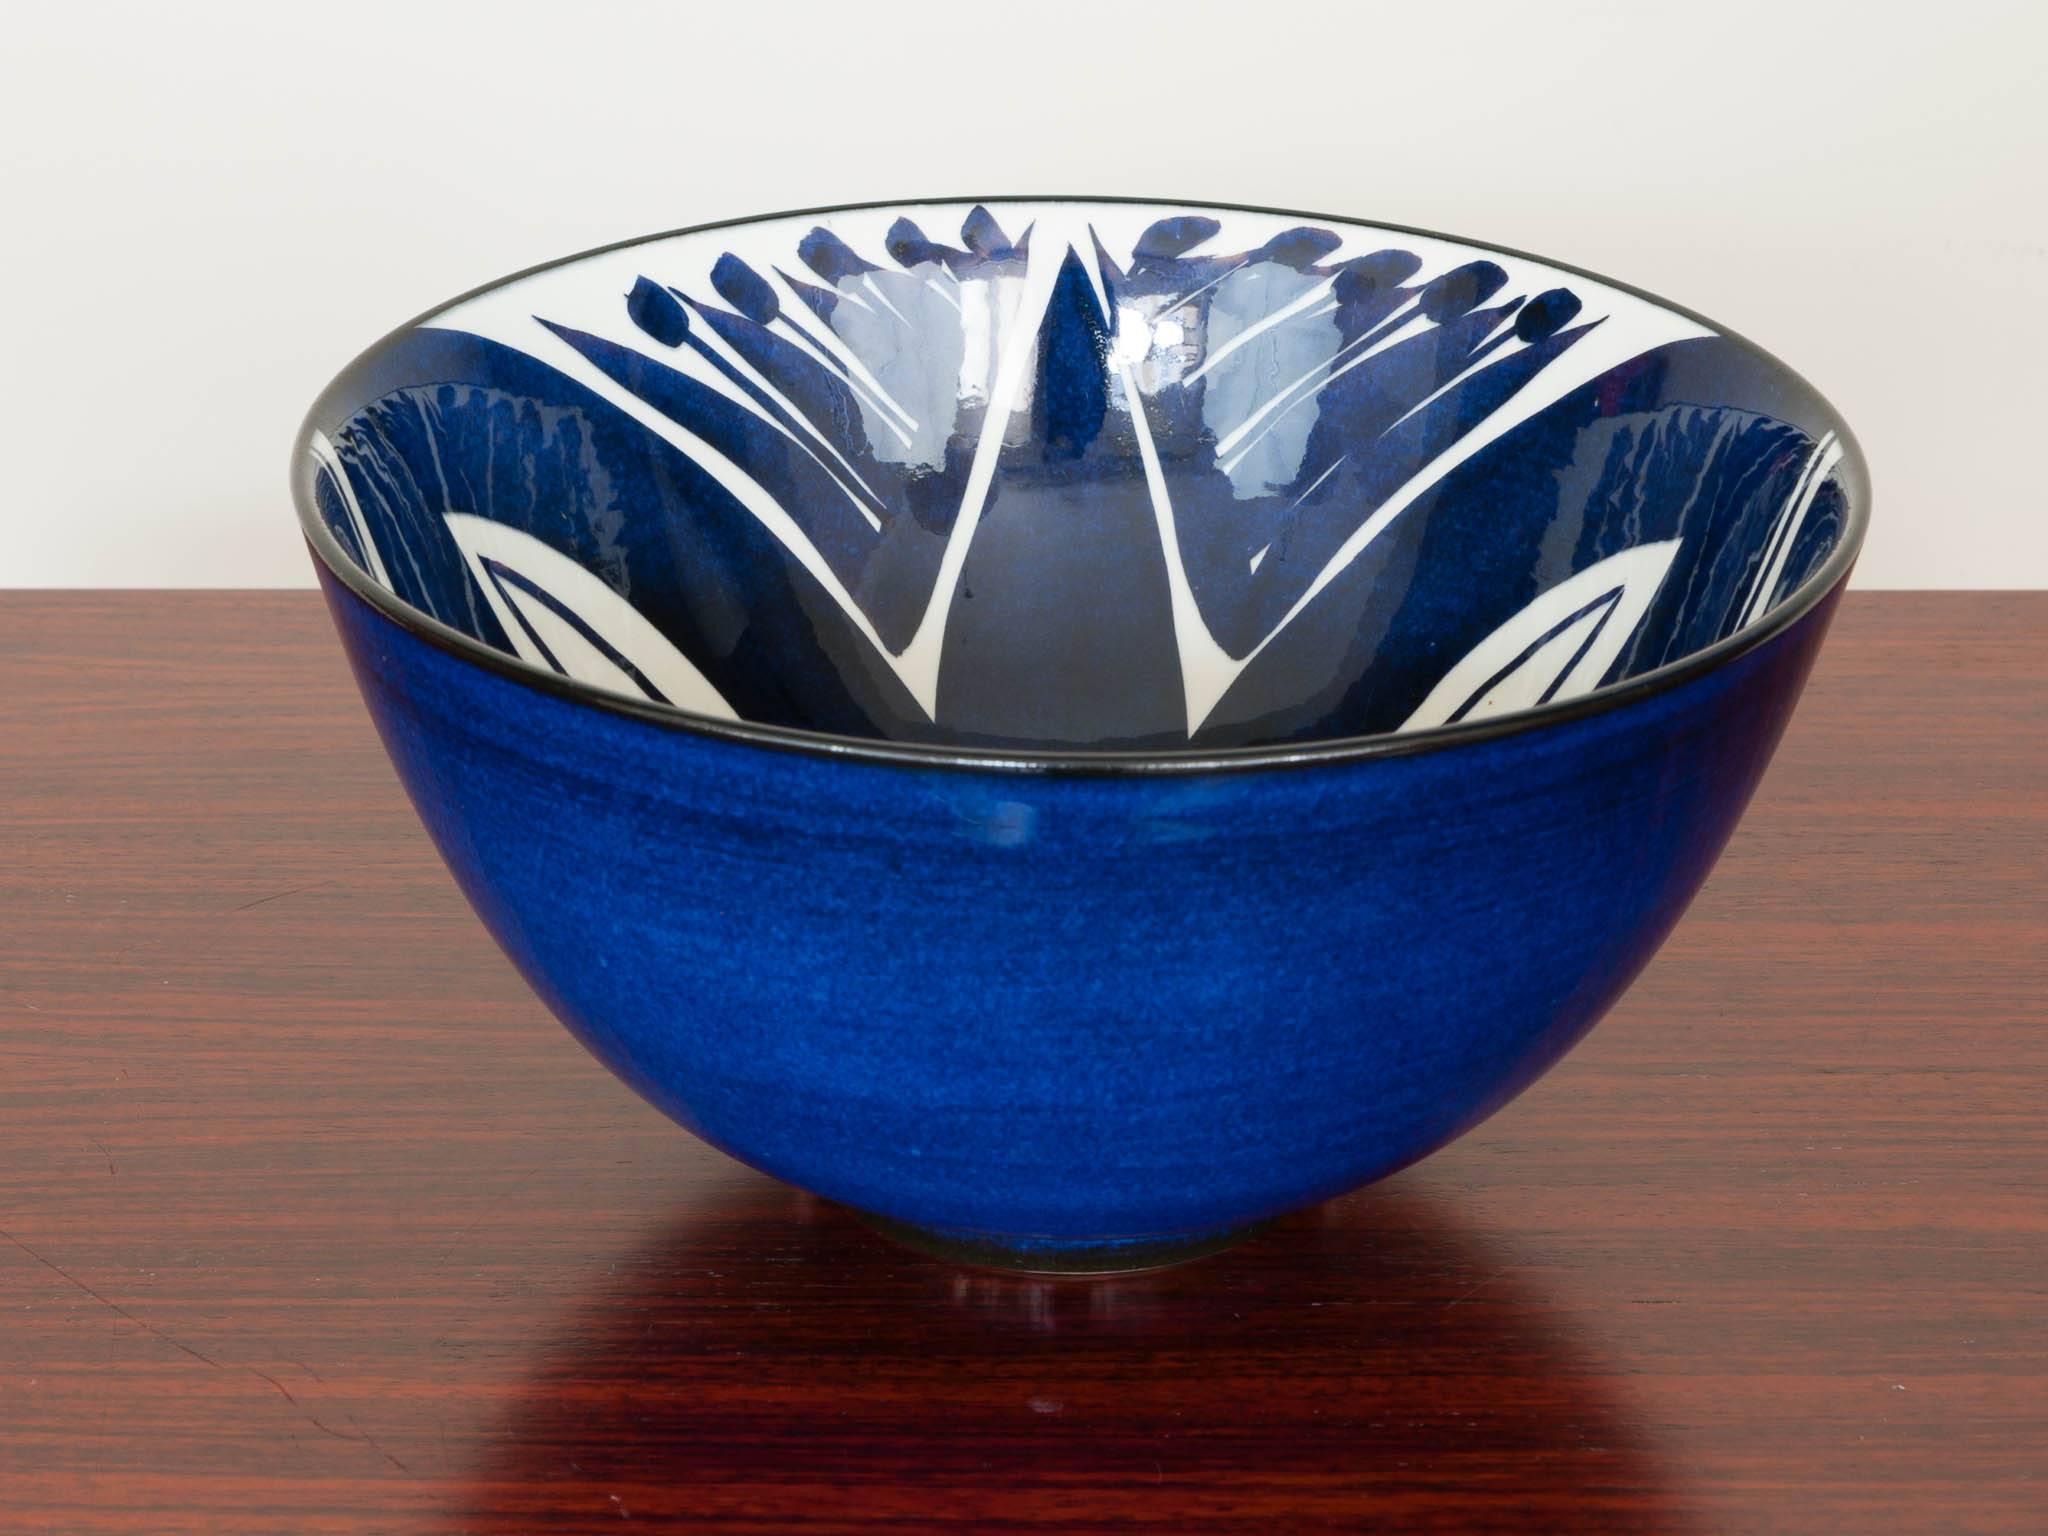 A stunning cobalt blue bowl from Royal Copenhagen, Denmark from the Aluminia Tenera series. Designed by Inge-Lise Koefoed. Marked on the base 136/2758 Fajance with the Inge-Lise Koefoed signature. It has no cracks or chips.